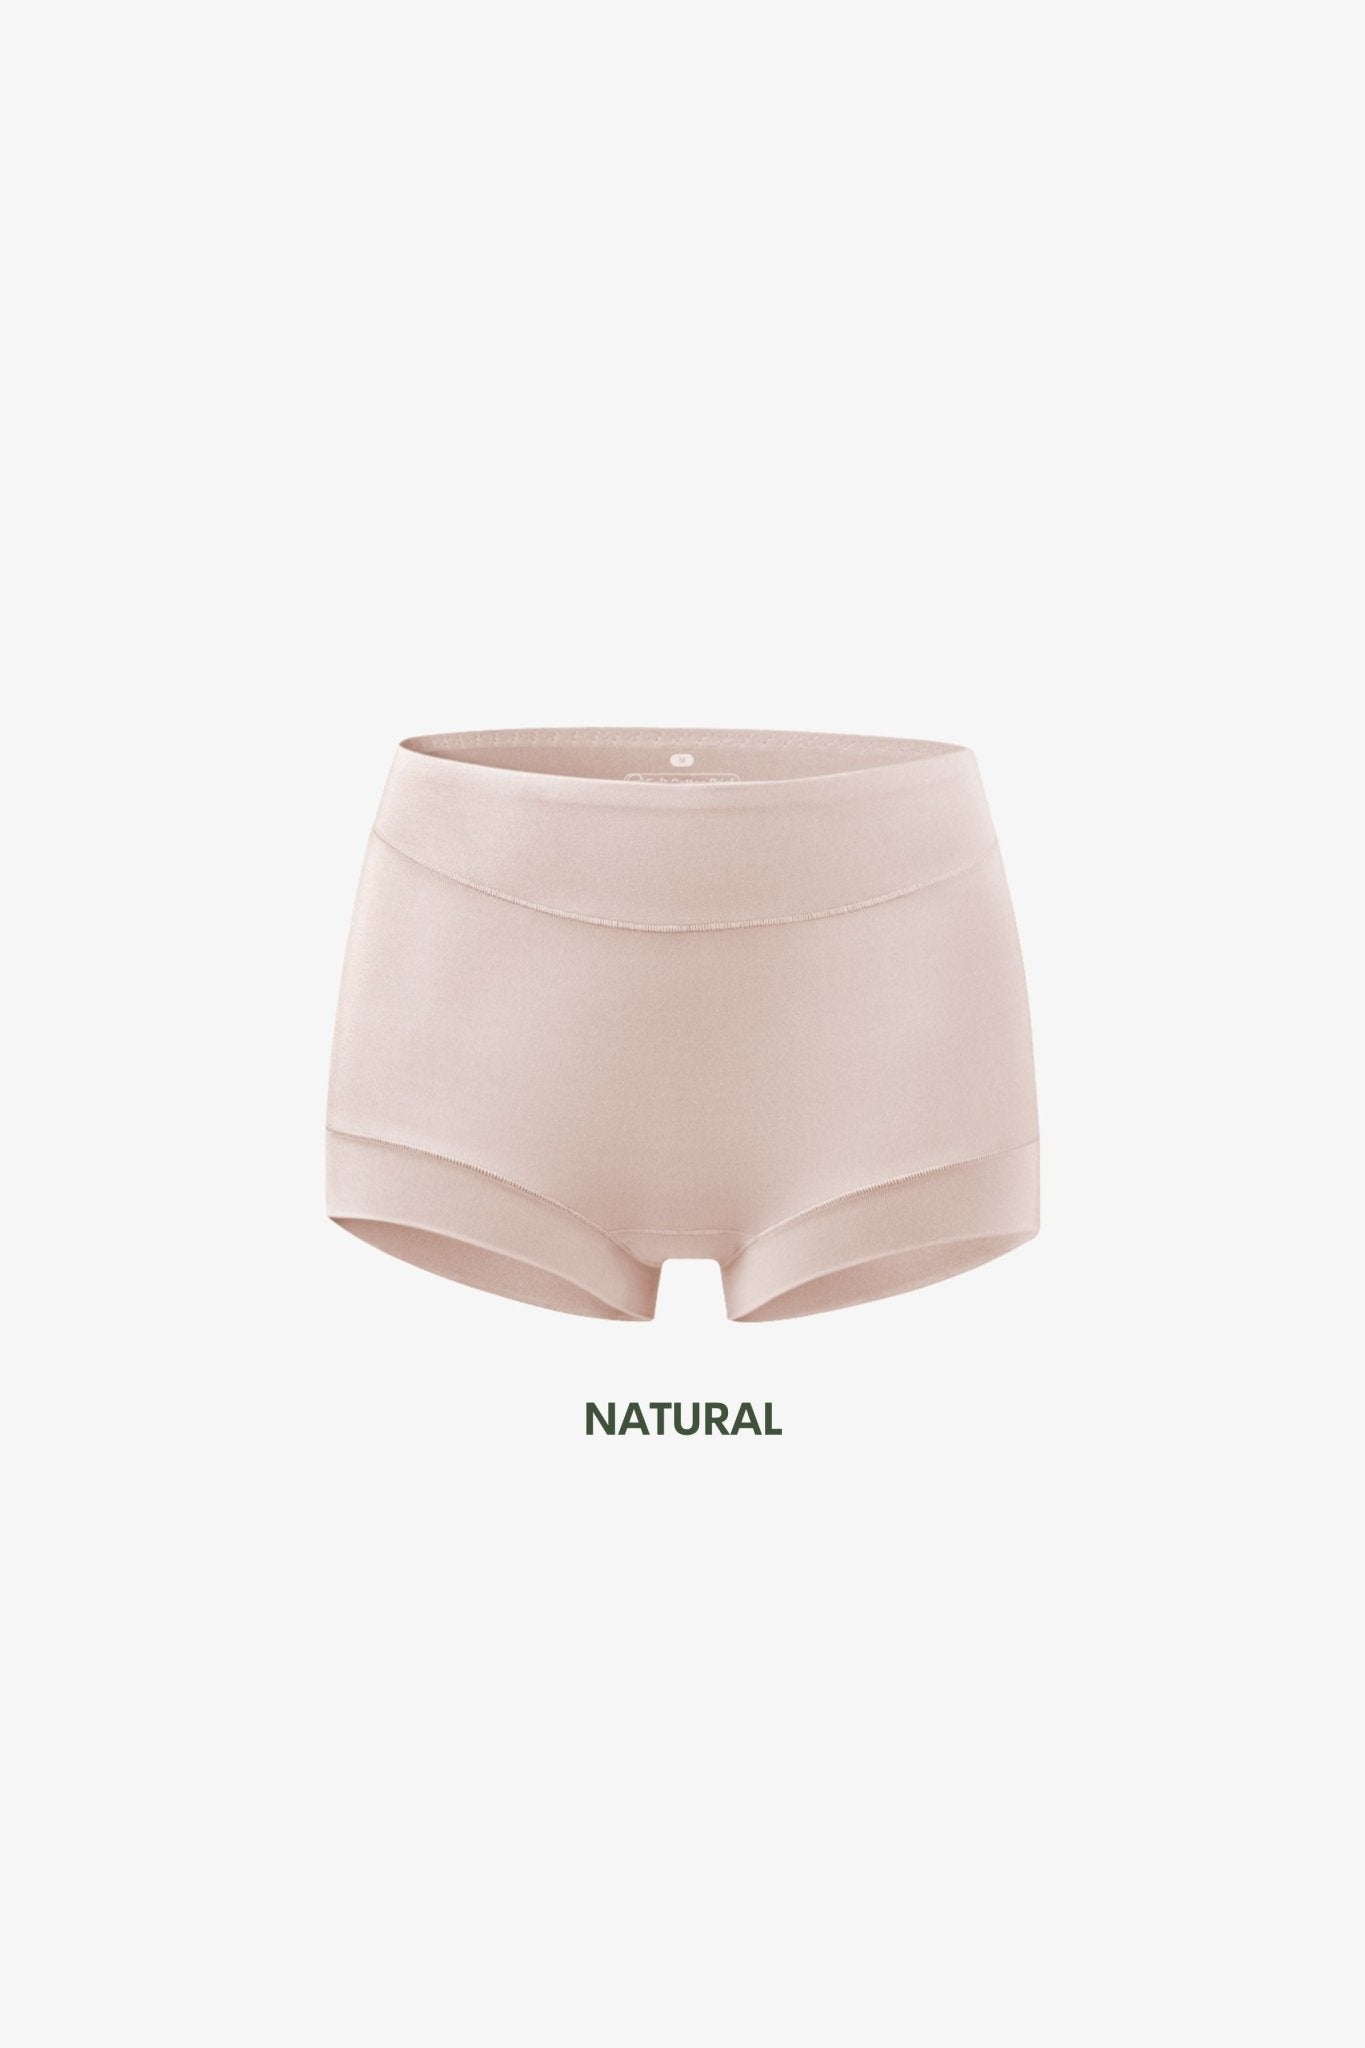 [NEW-IN] Soft Cotton 60S Modal Antibacterial Panty In Natural - Adelais Official